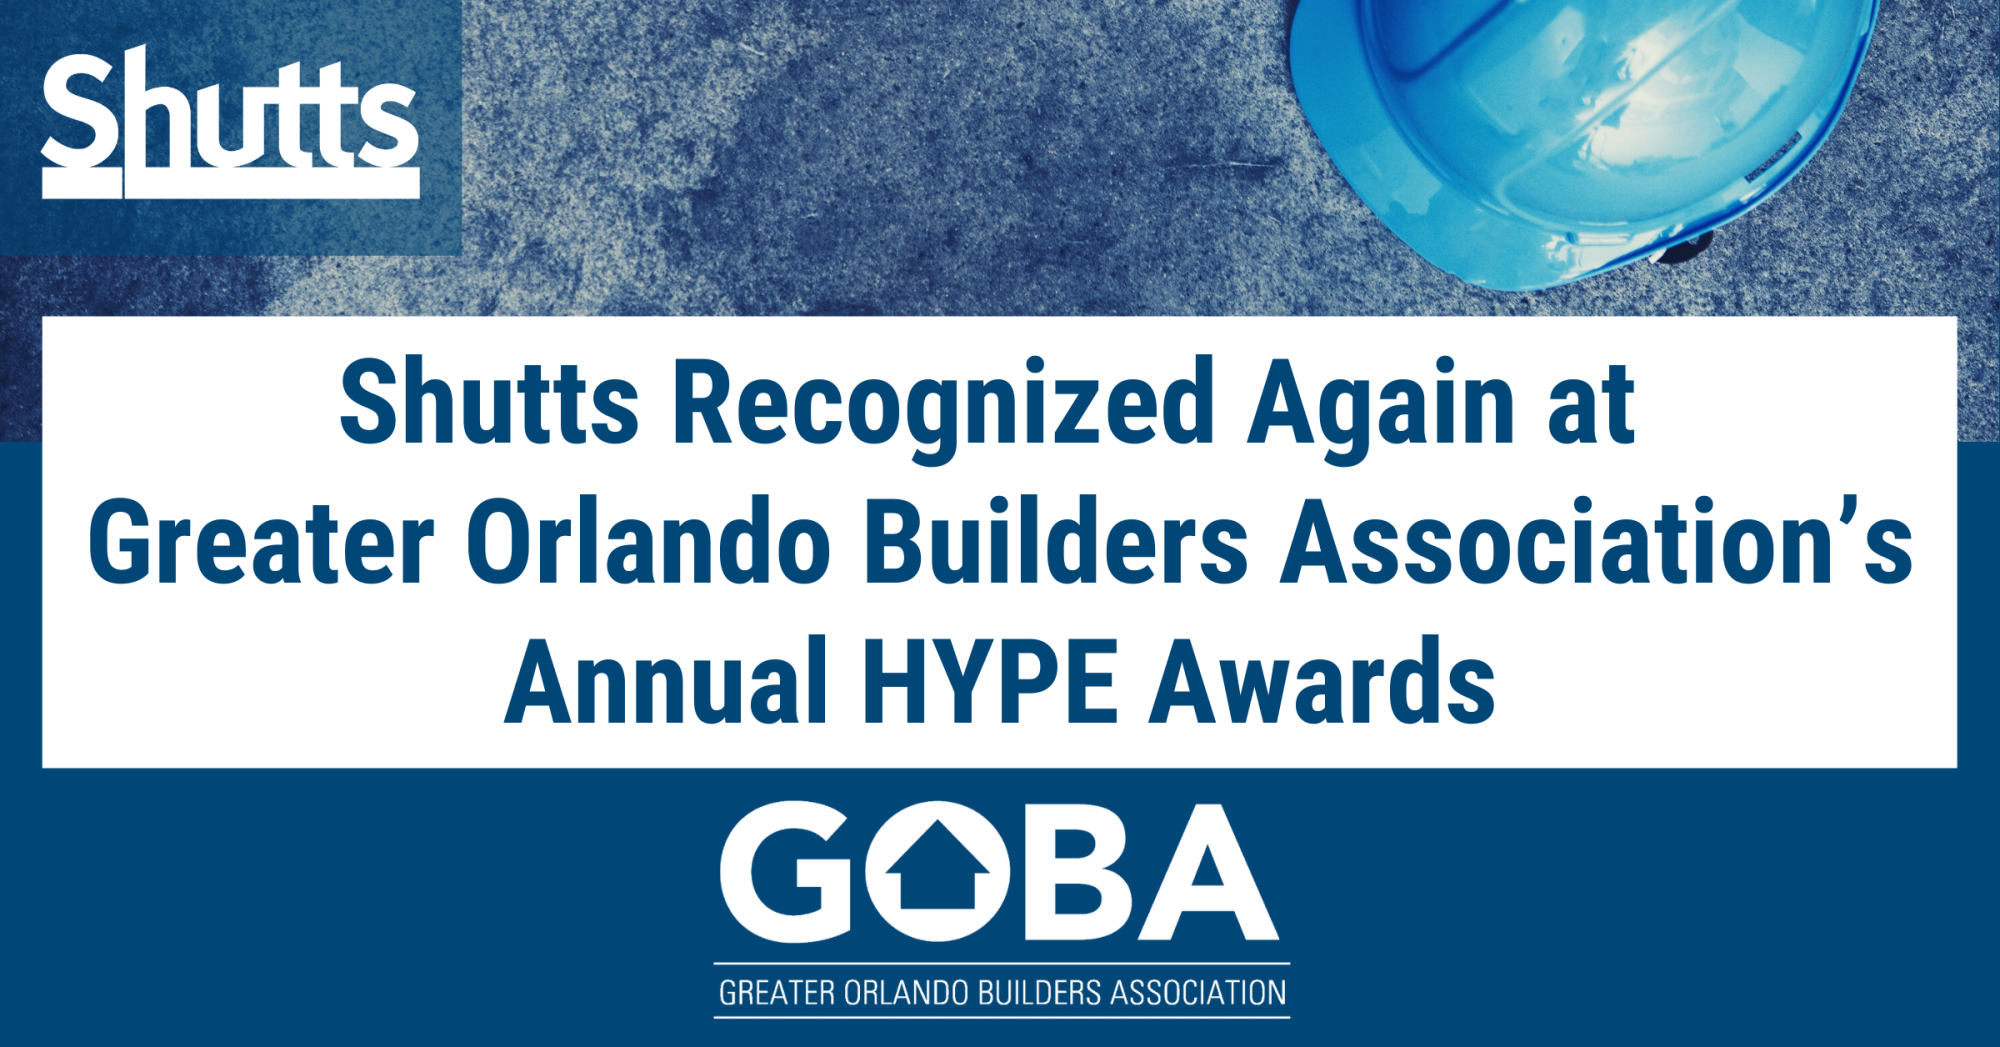 Shutts & Bowen Recognized Again at Greater Orlando Builders Association’s Annual HYPE Awards